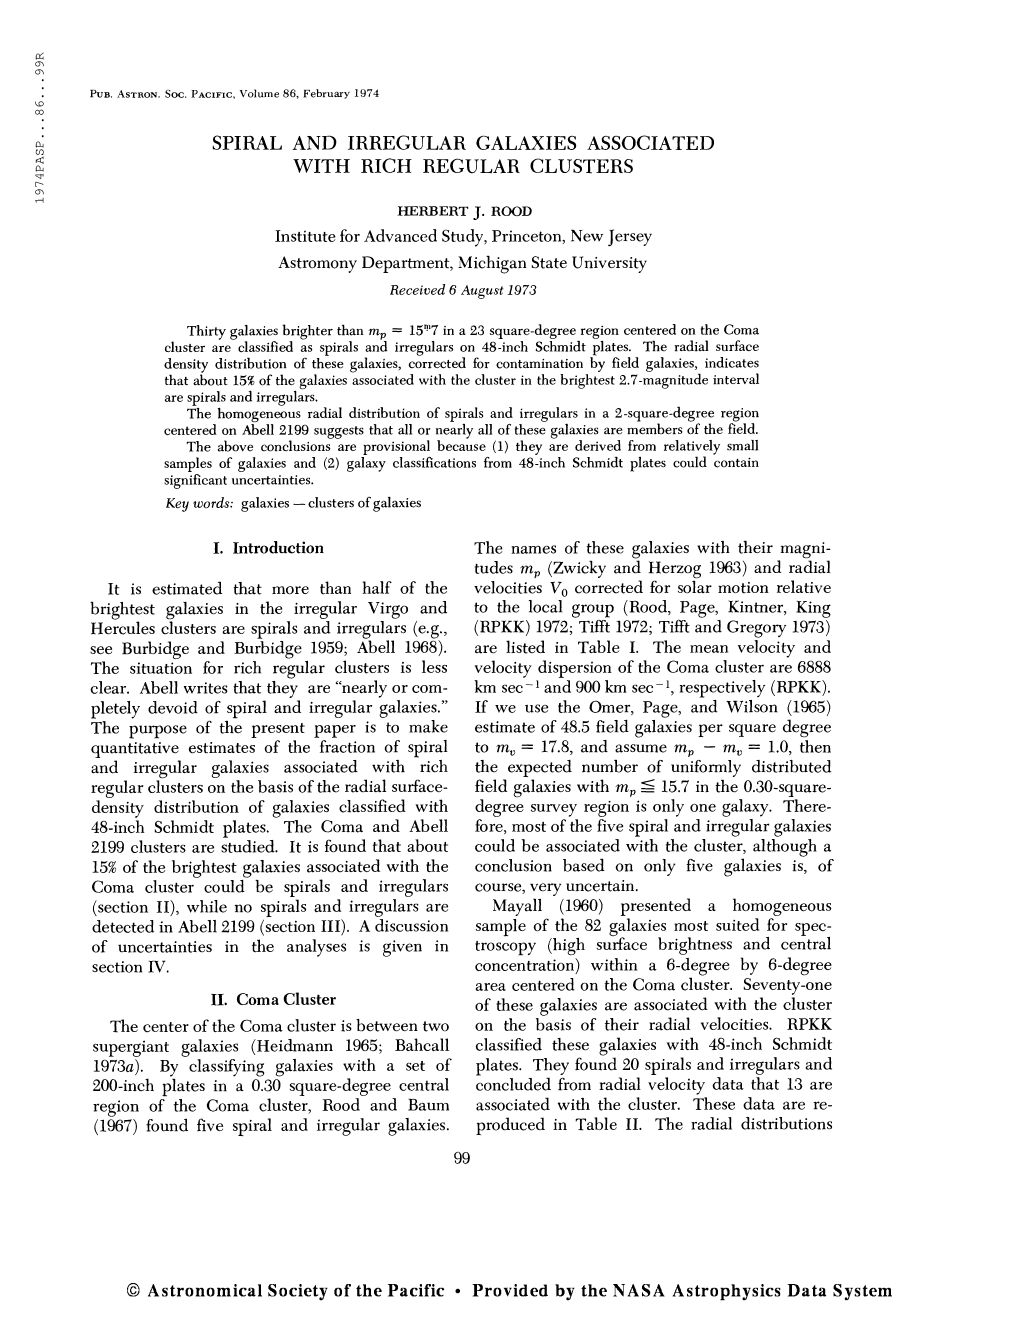 Pub. Astron. Soc. Pacific, Volume 86, February 1974 SPIRAL and IRREGULAR GALAXIES ASSOCIATED with RICH REGULAR CLUSTERS HERBERT